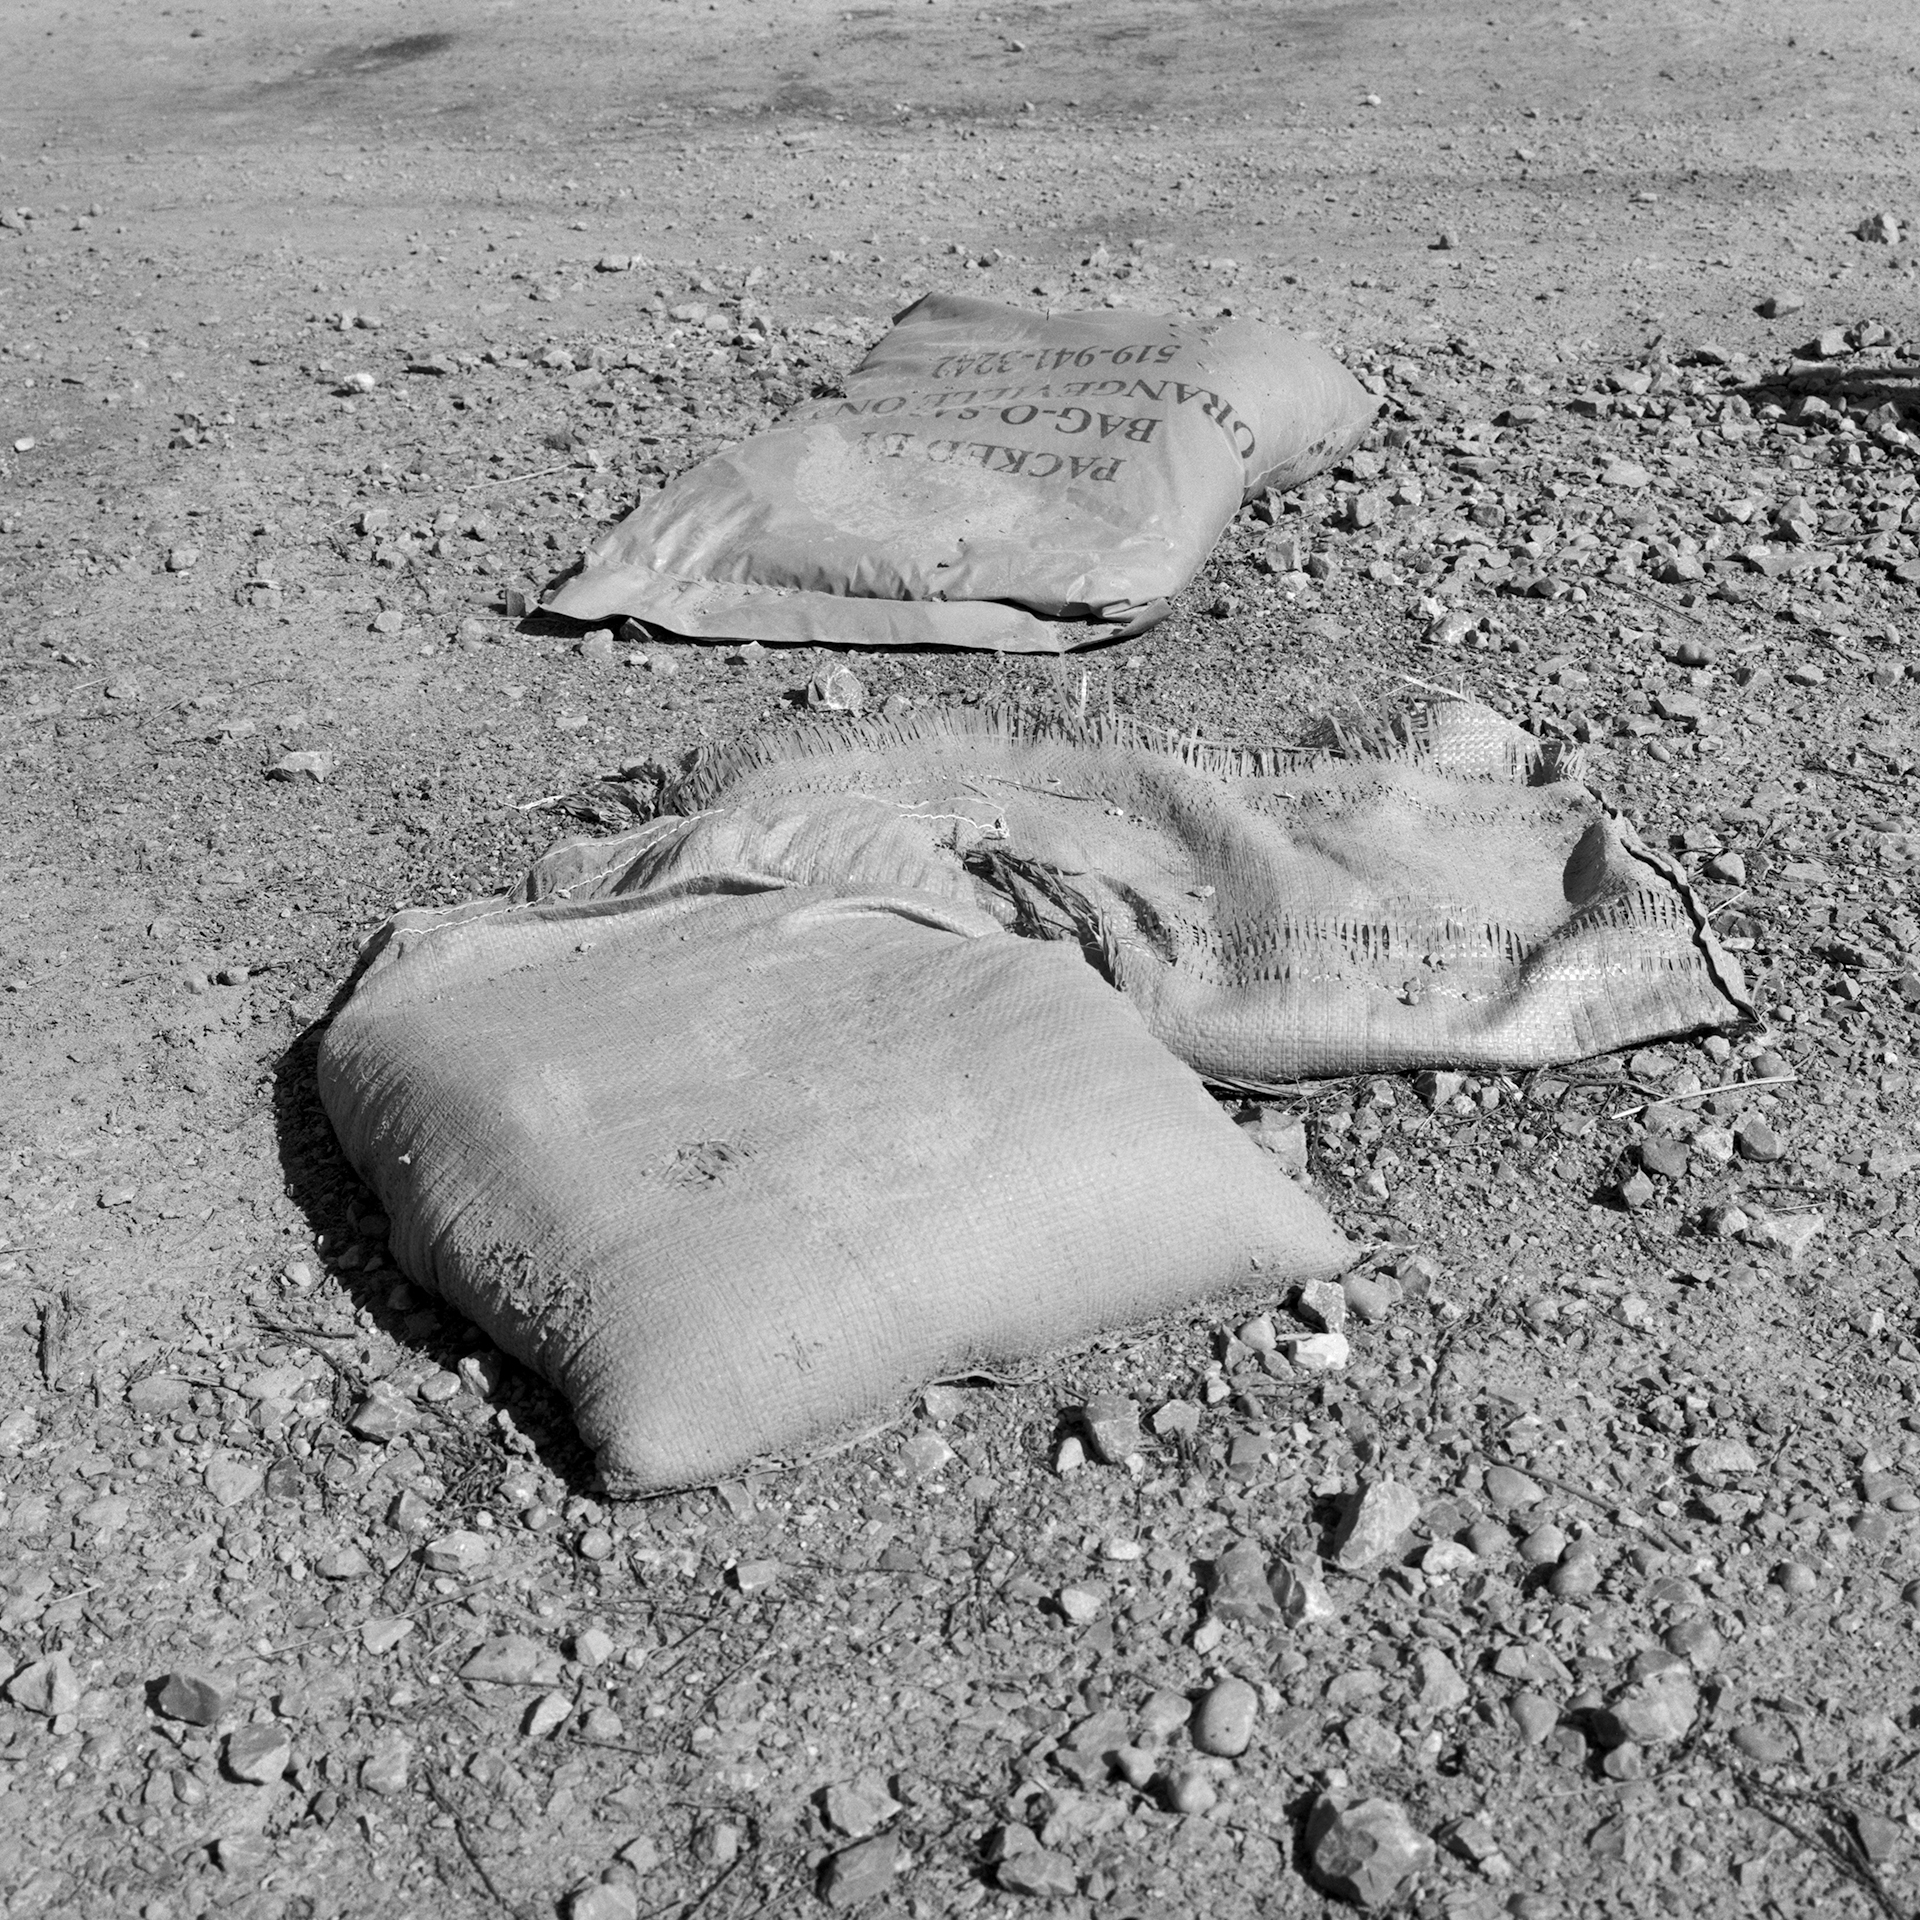 Where The River Runs # 2: A square black and white photograph of three bags of sand strewn about dirt and rocks. The material on the bags is fraying, and their contents are spilling out. A footprint from a construction boot can be seen on one bag of sand.